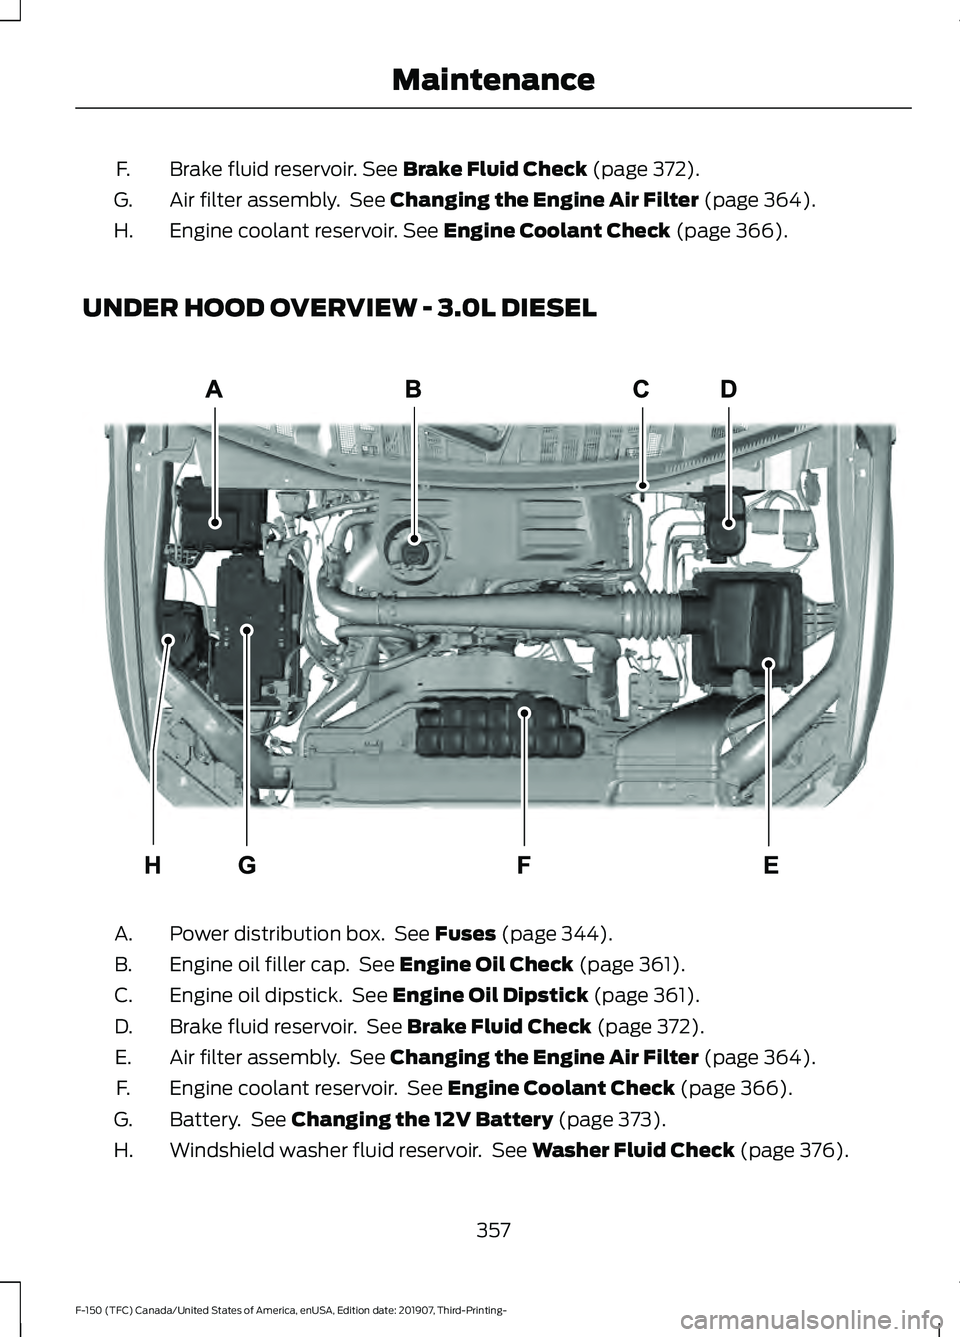 FORD F-150 2020  Owners Manual Brake fluid reservoir. See Brake Fluid Check (page 372).
F.
Air filter assembly.  See 
Changing the Engine Air Filter (page 364).
G.
Engine coolant reservoir.
 See Engine Coolant Check (page 366).
H.
